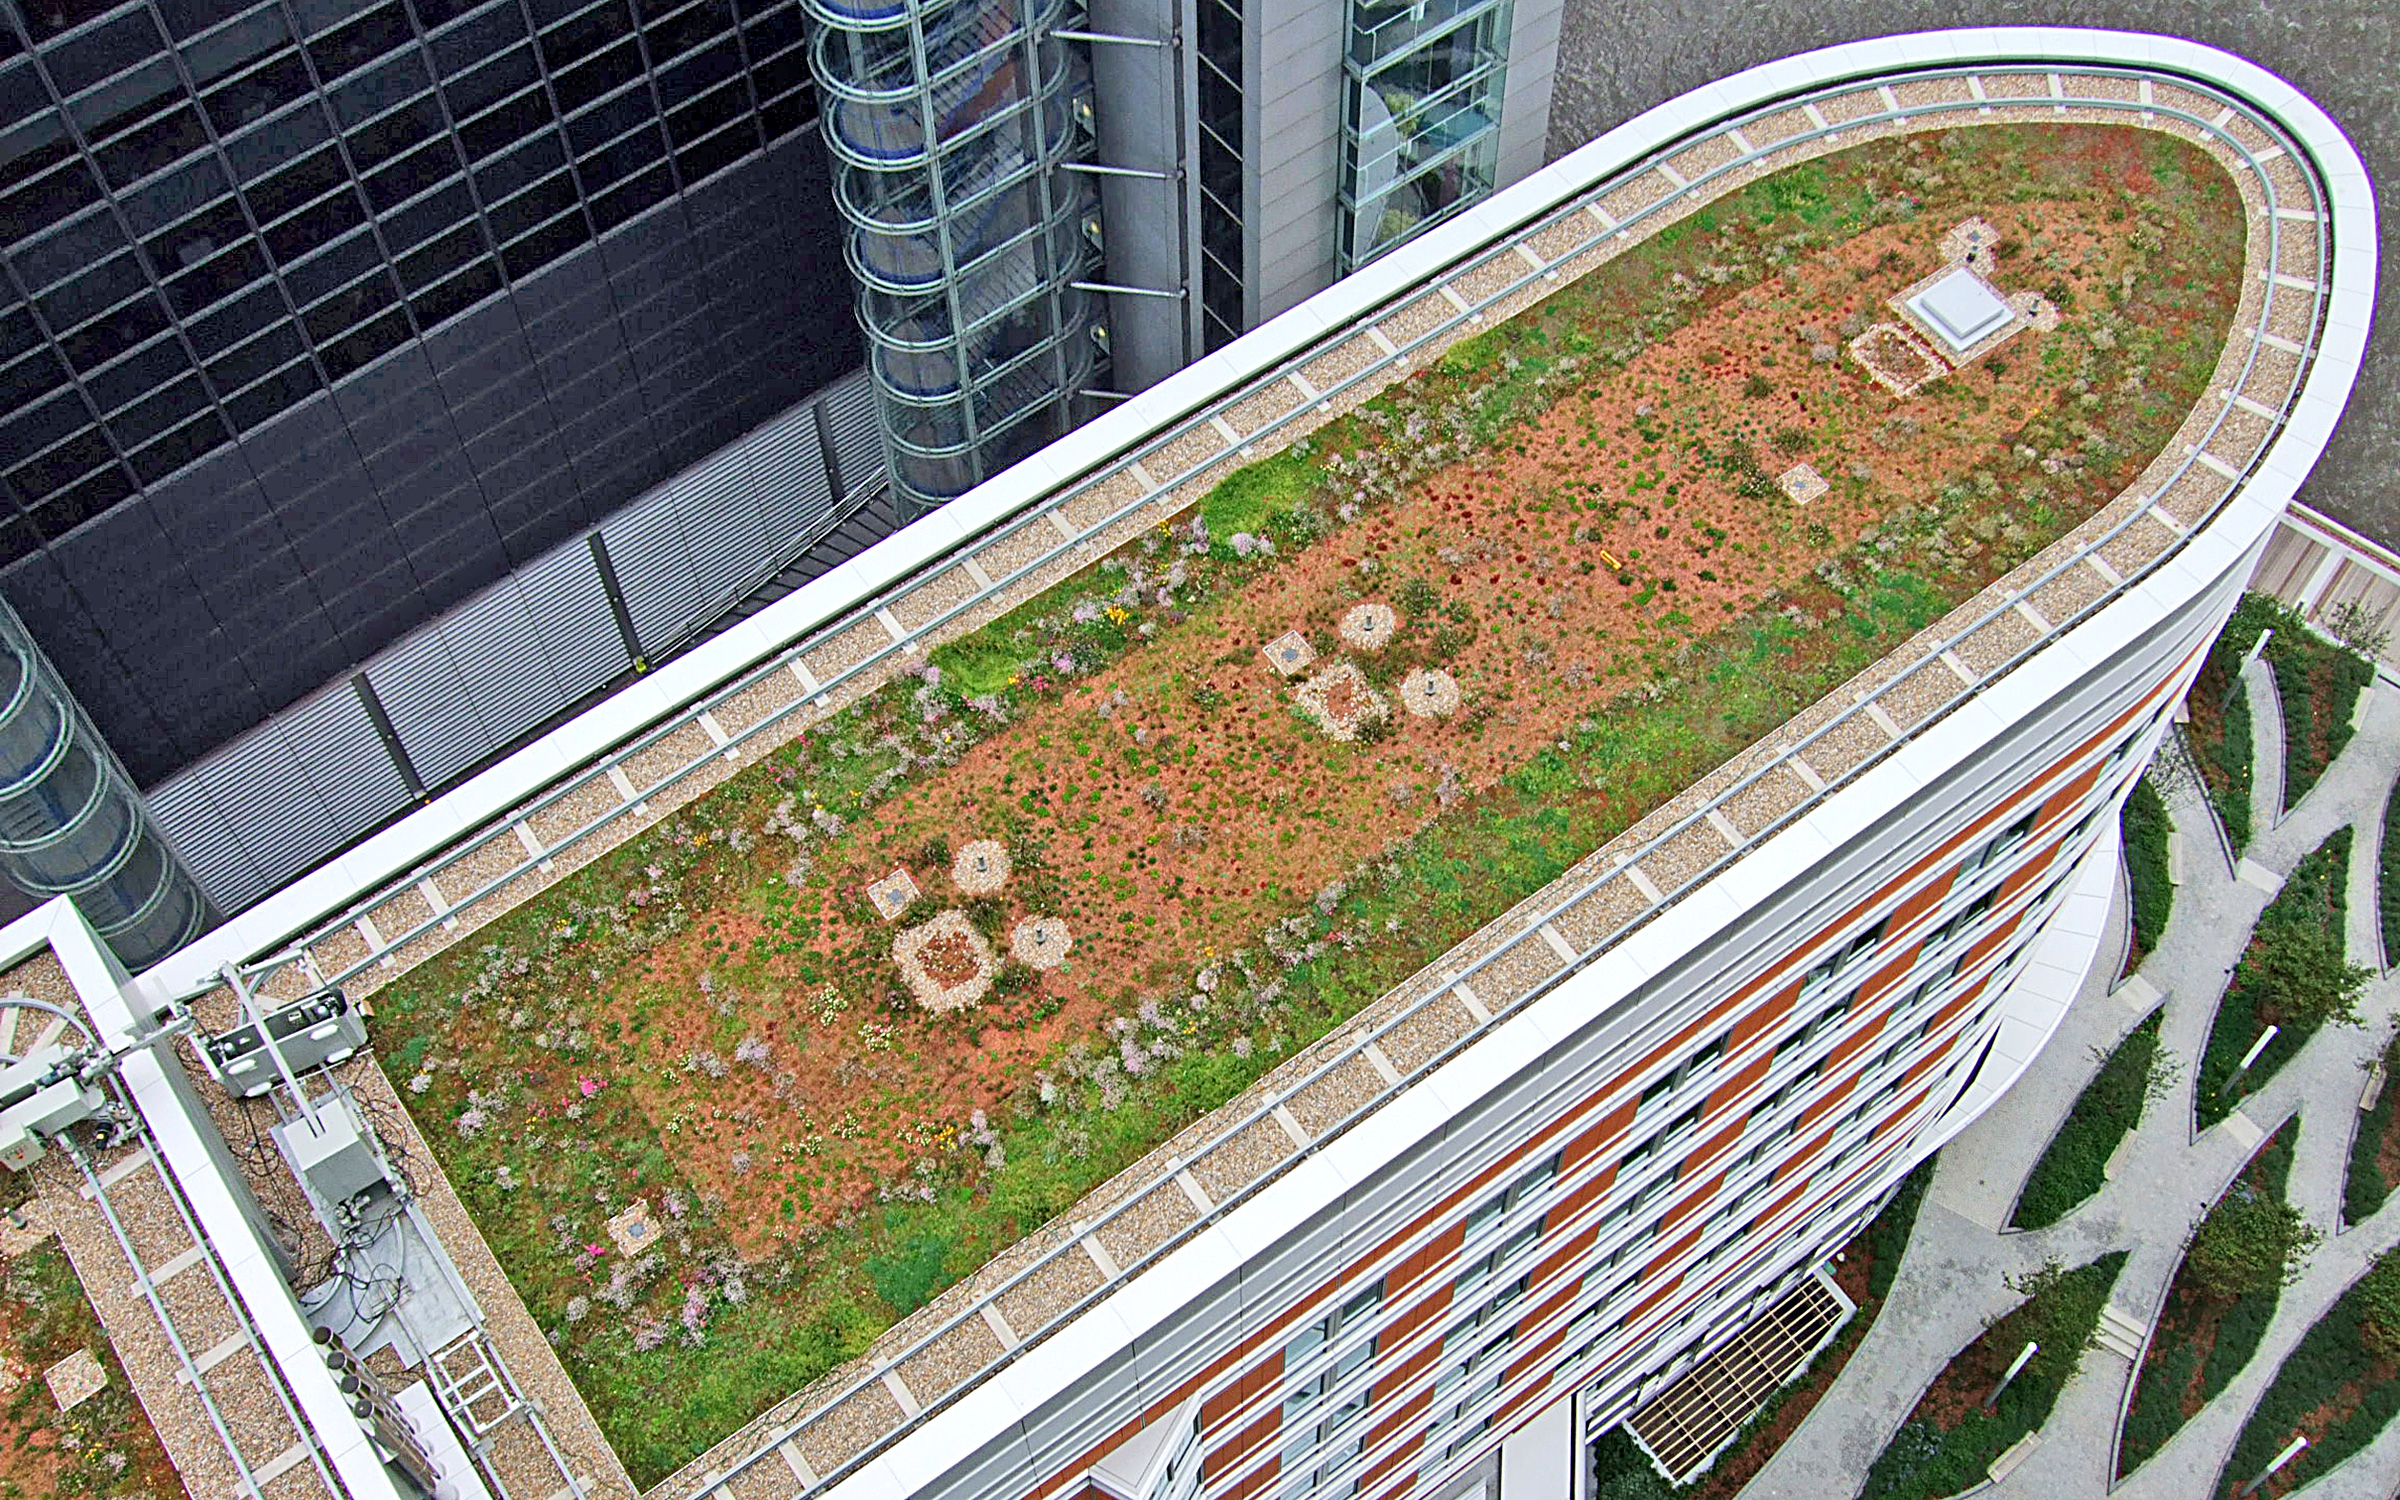 Bird's eye view onto the green roof of a tall building